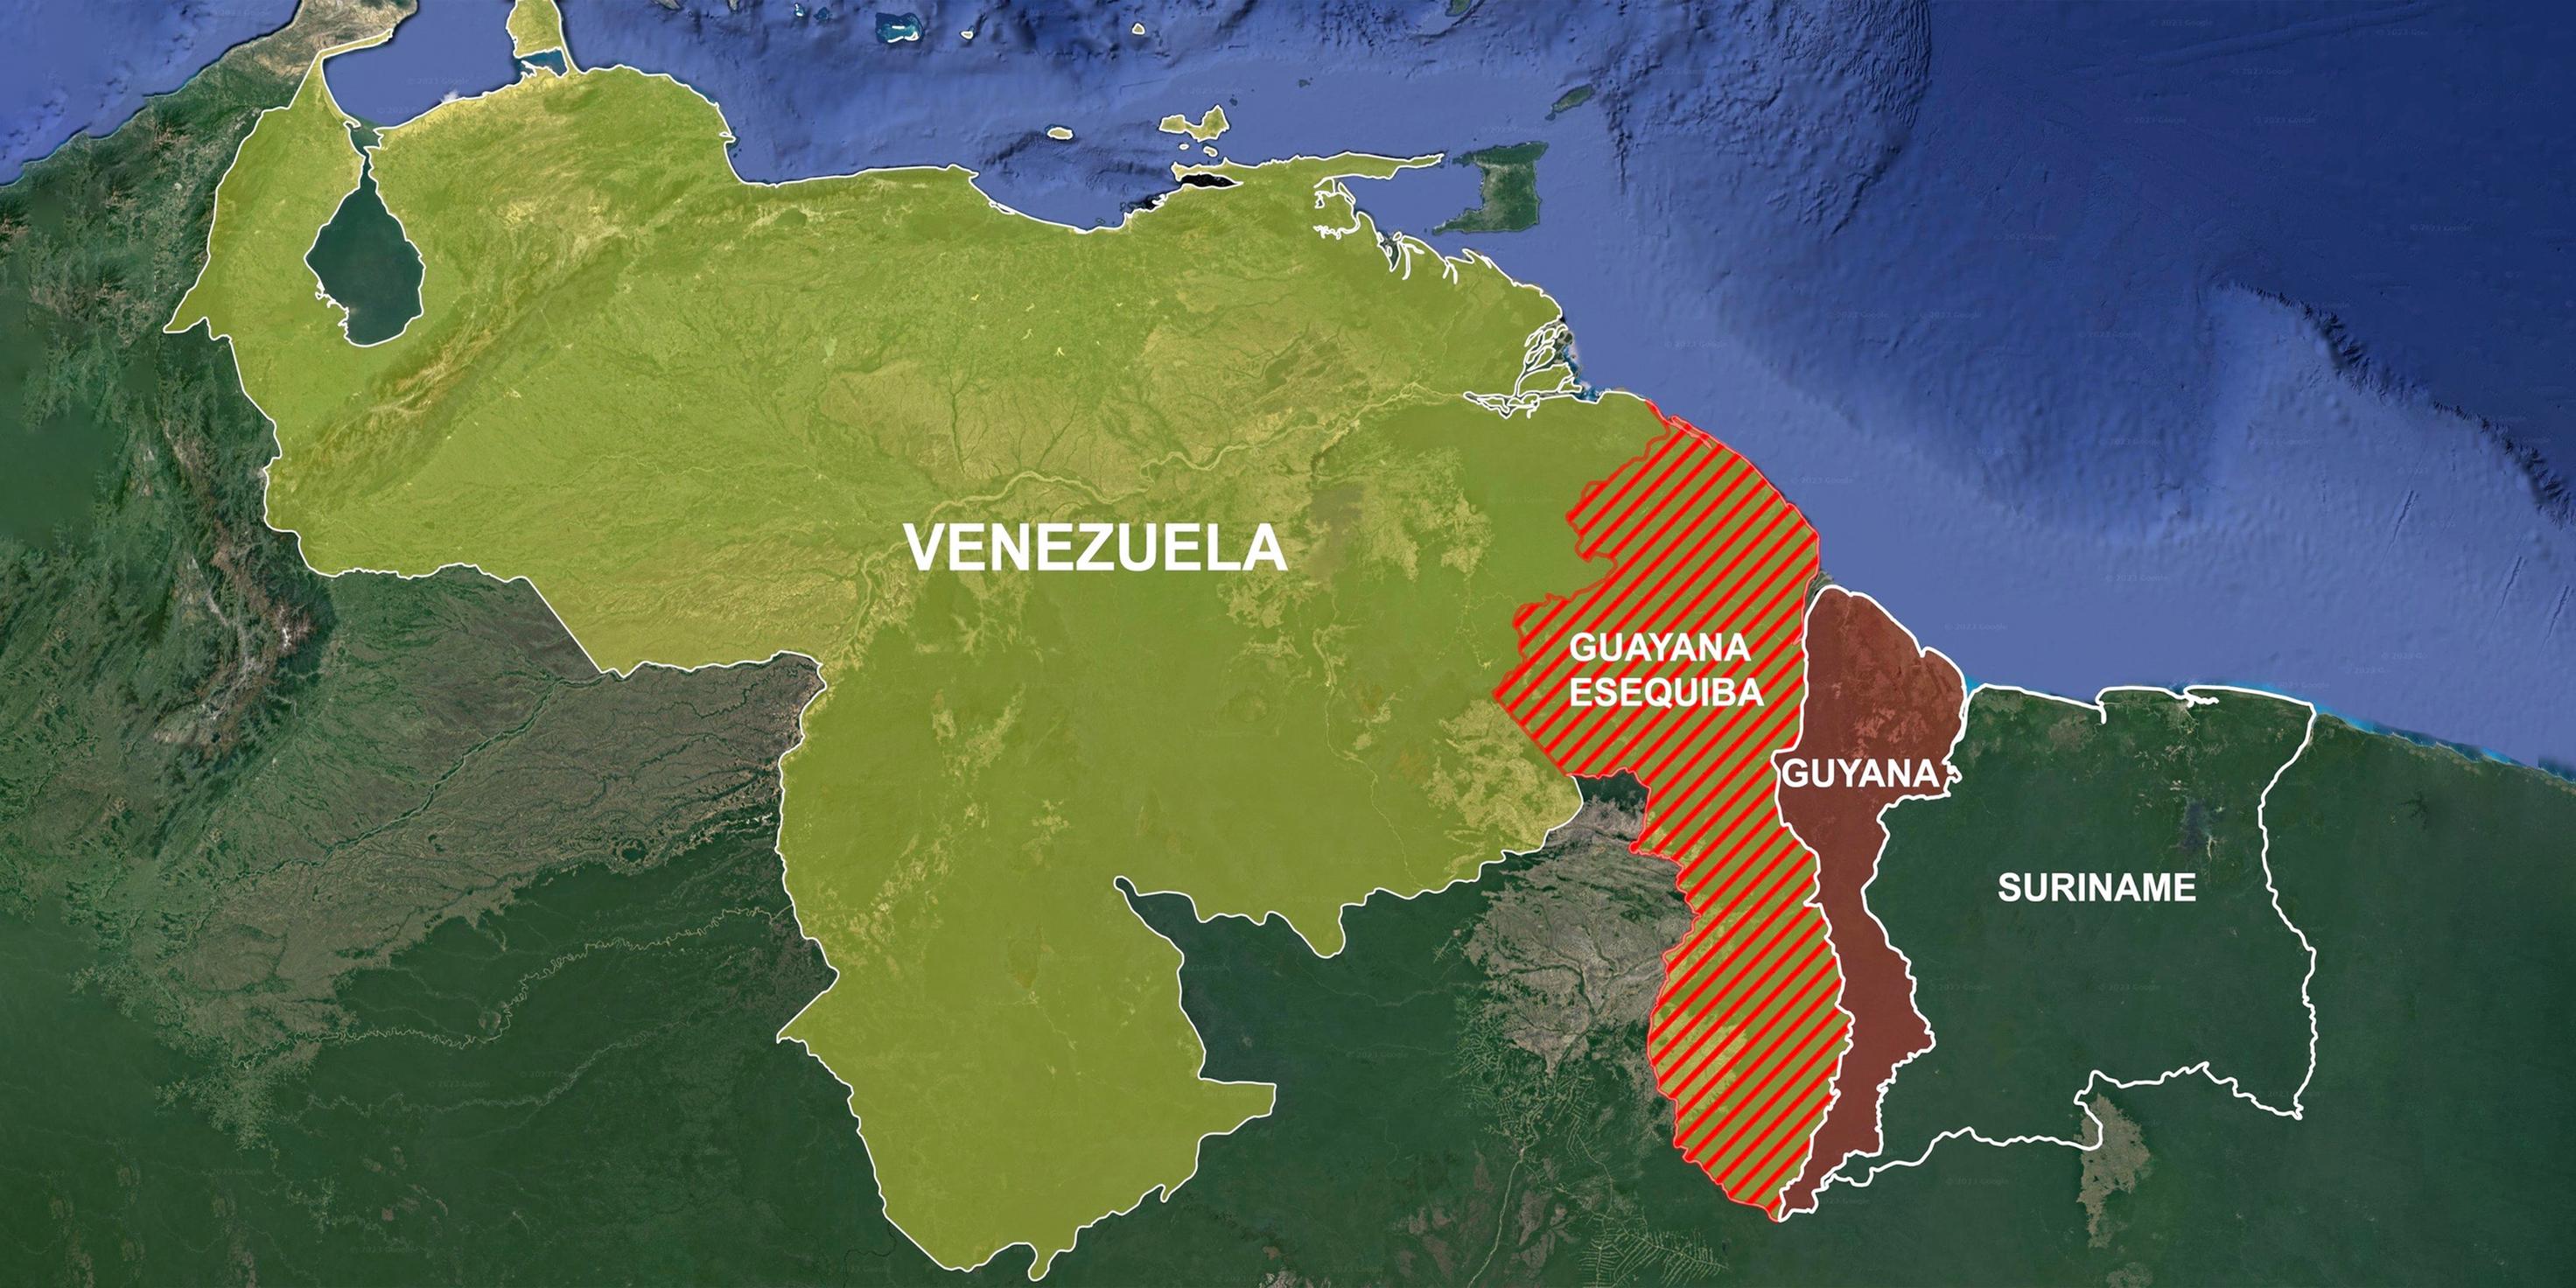 What Are the Implications of the Tensions between Venezuela and Guyana?